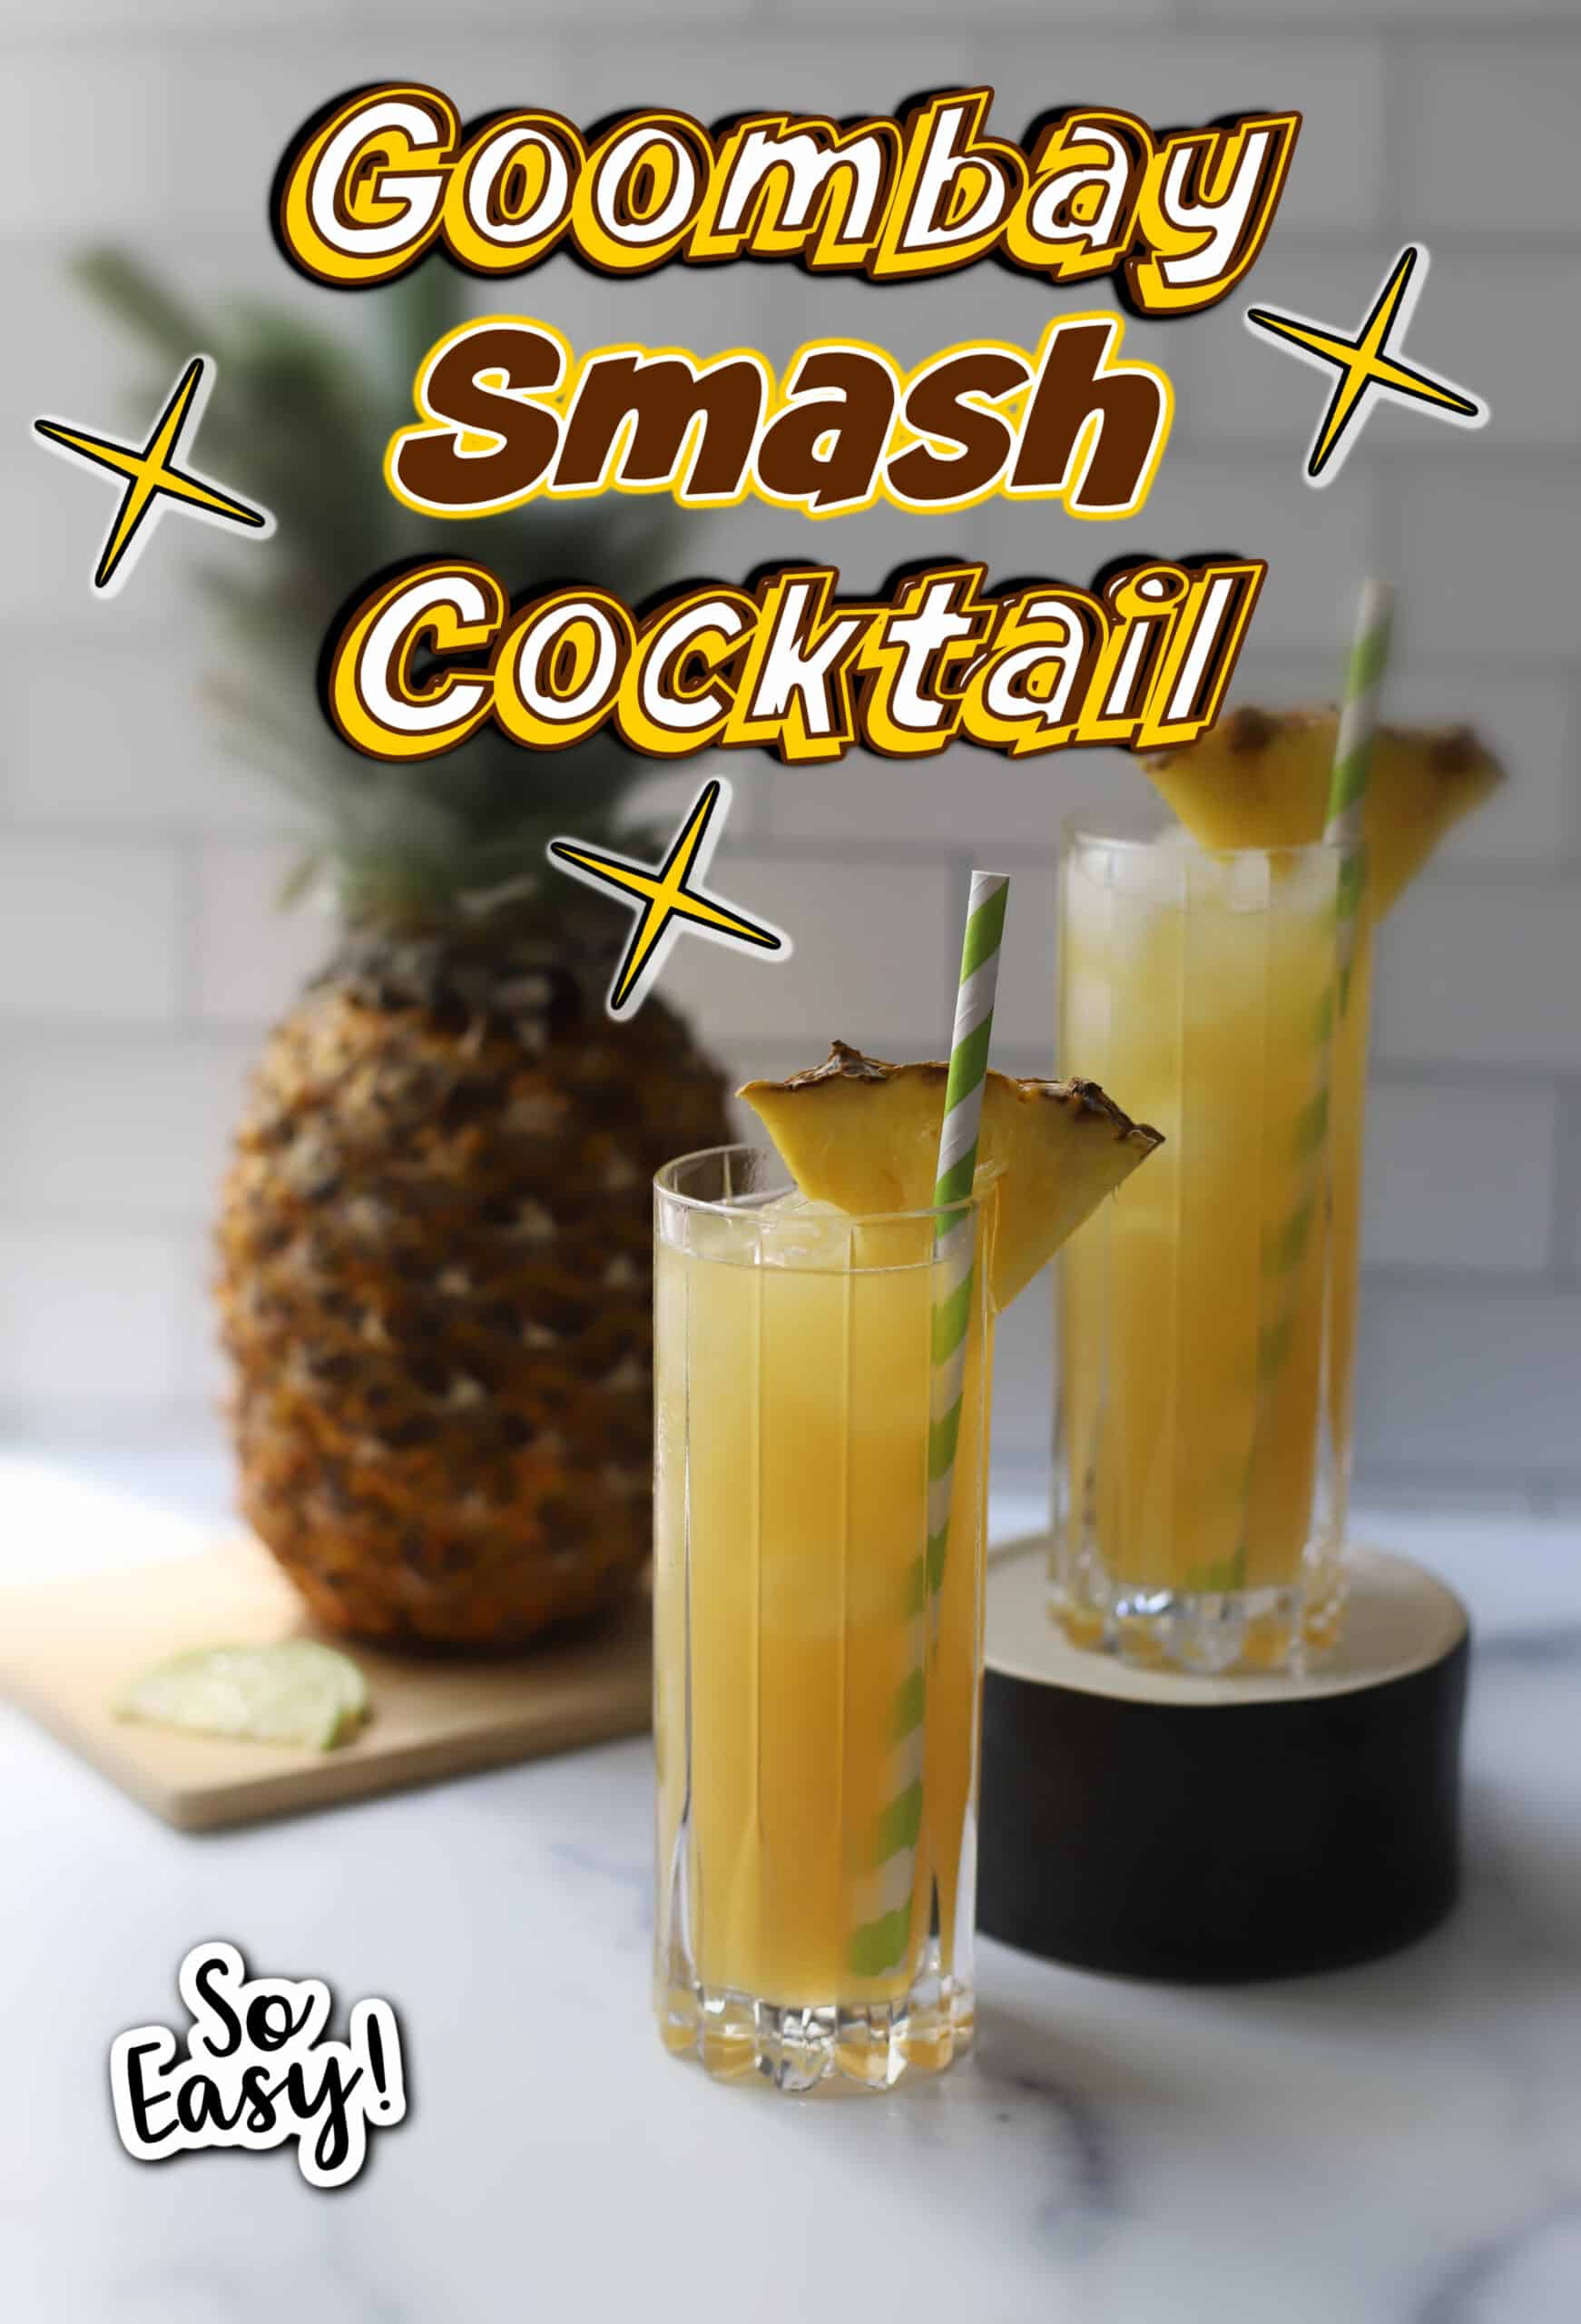 Cocktails with pineapple wedges and pineapple in background with writing overlay.